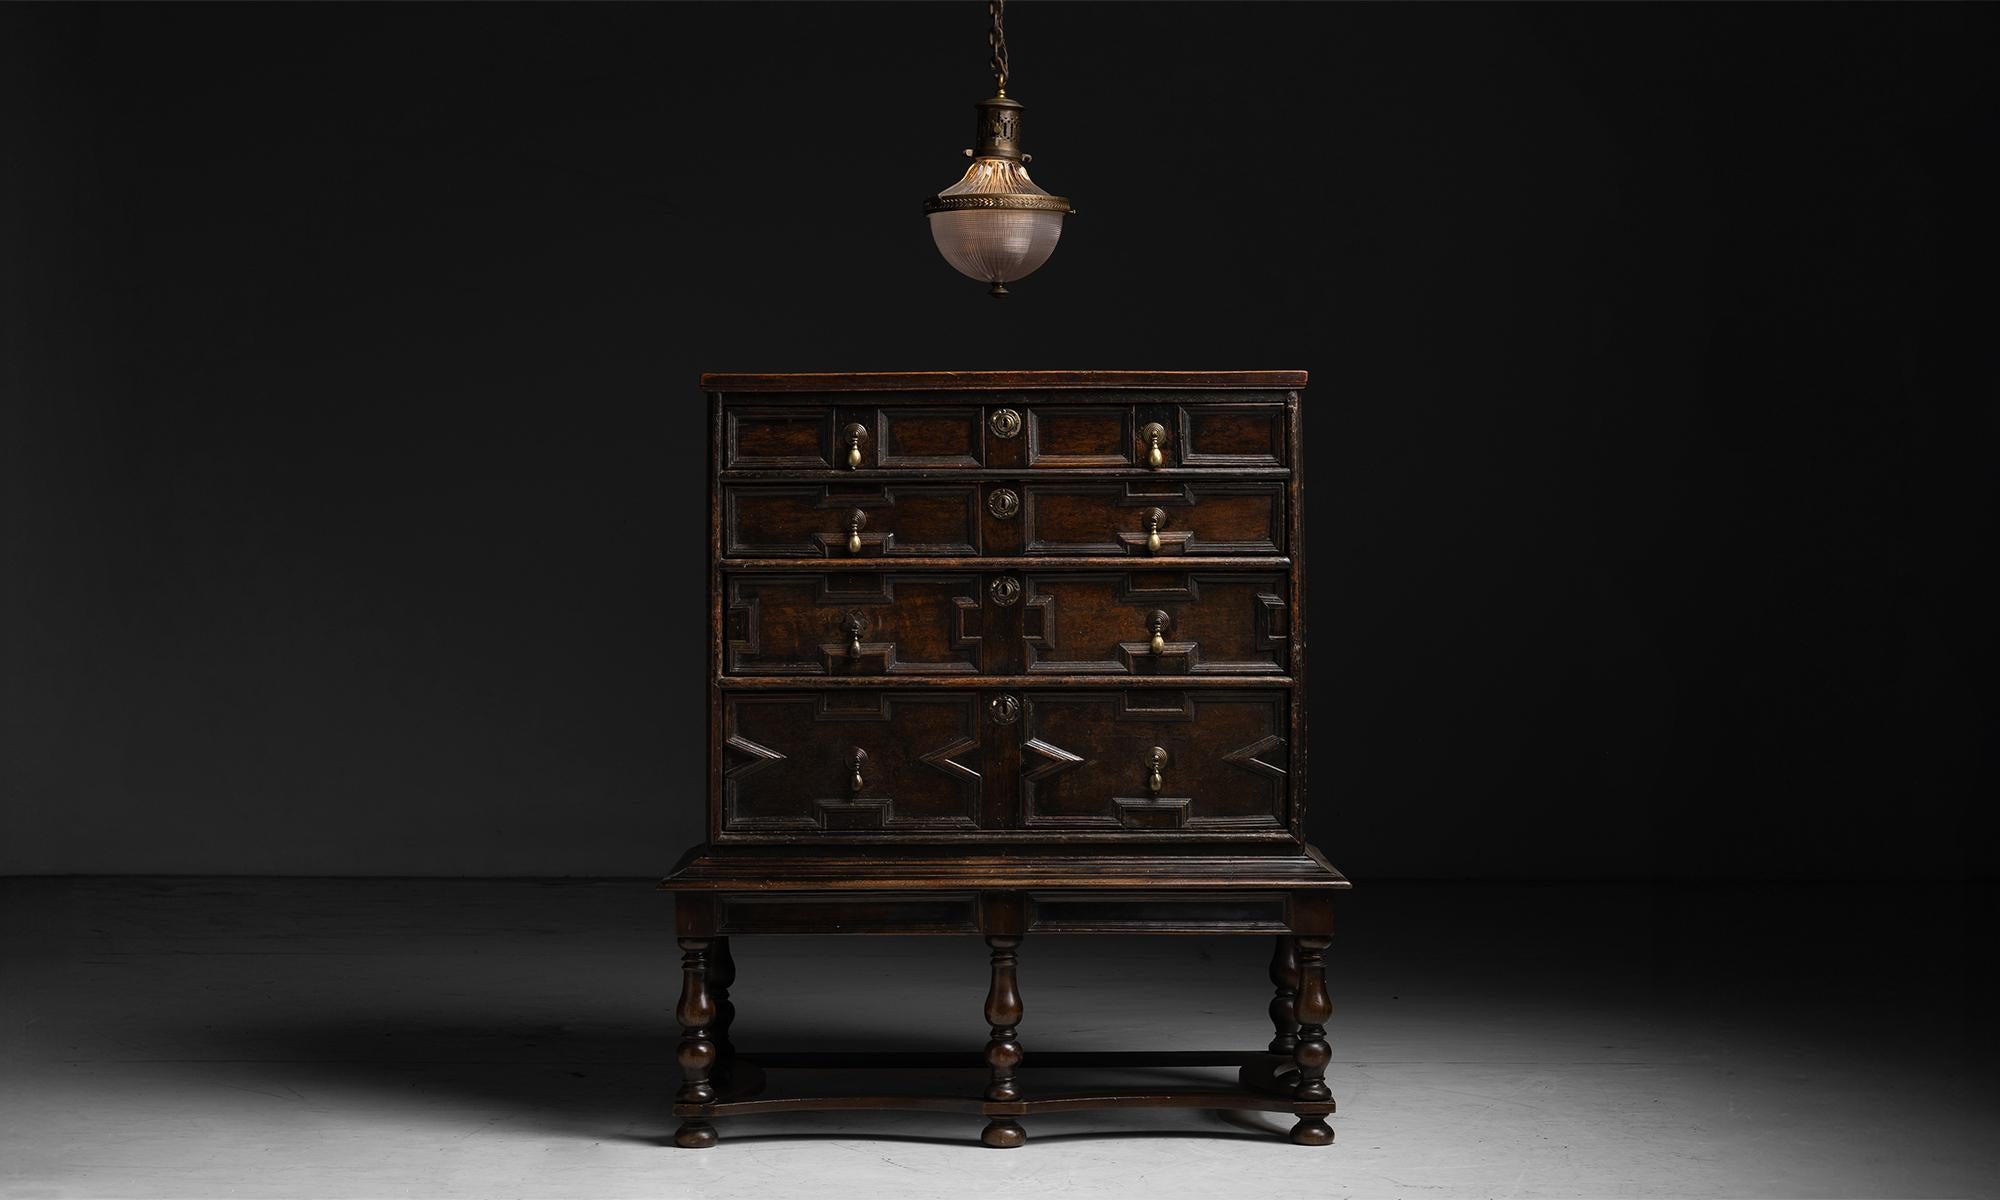 Chest of Drawers on Stand

England circa 1760

Constructed in oak, with geometric carved details, original brass pulls, on turned leg stand.

45.75”w x 25”d x 51.5”h